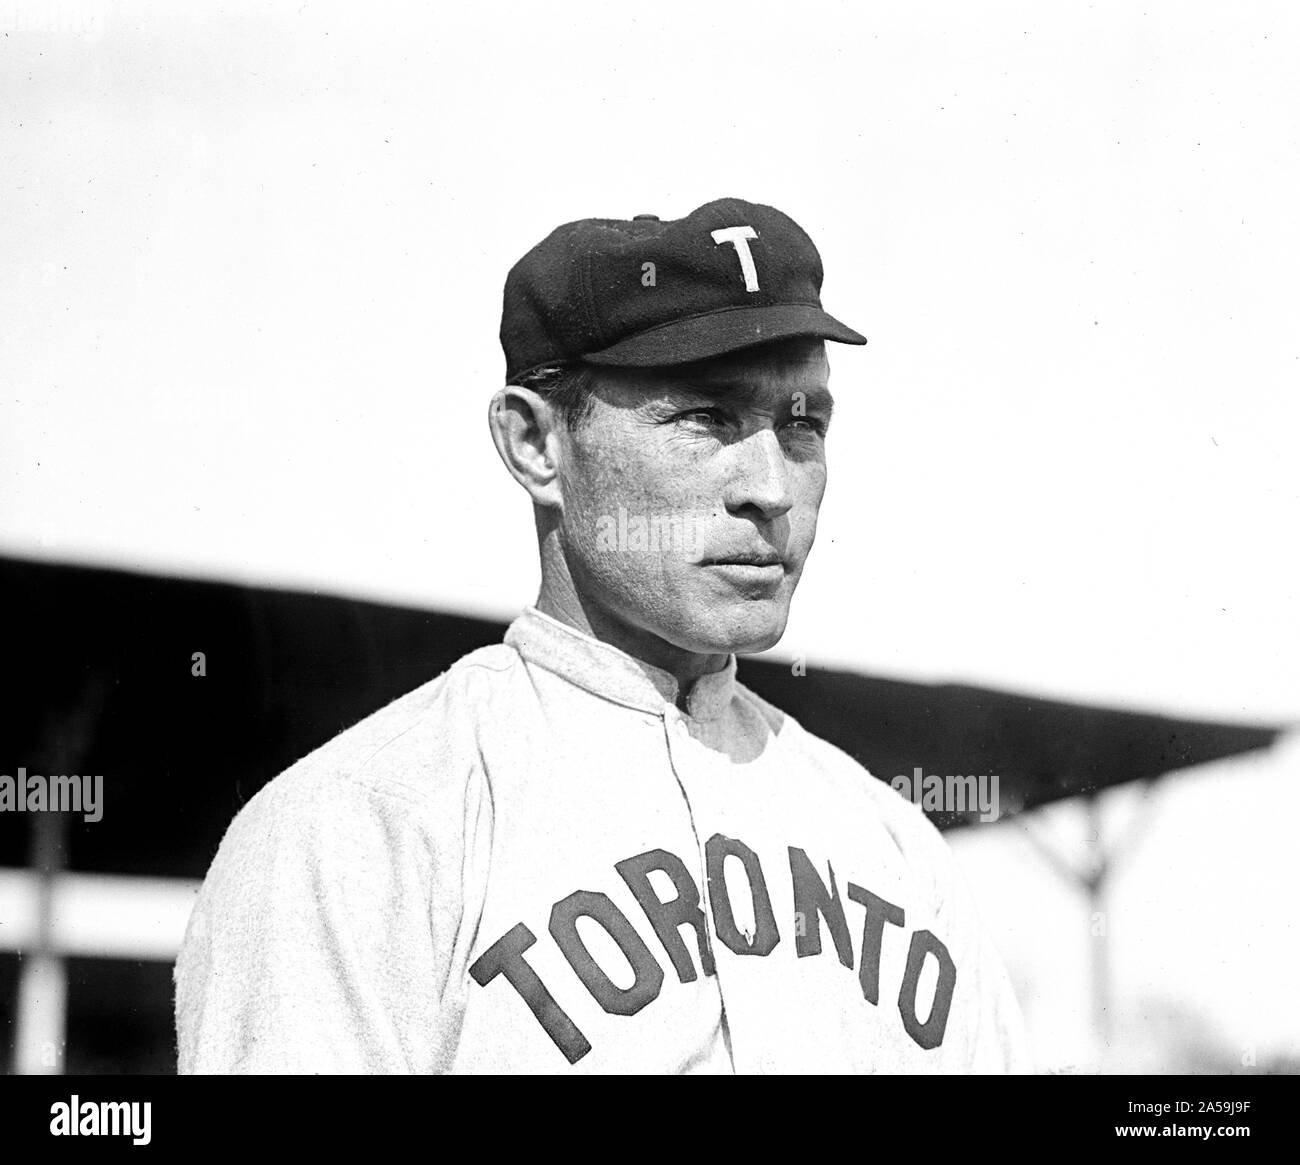 The original Maple Leafs: Pro-baseball in Toronto before the Blue Jays